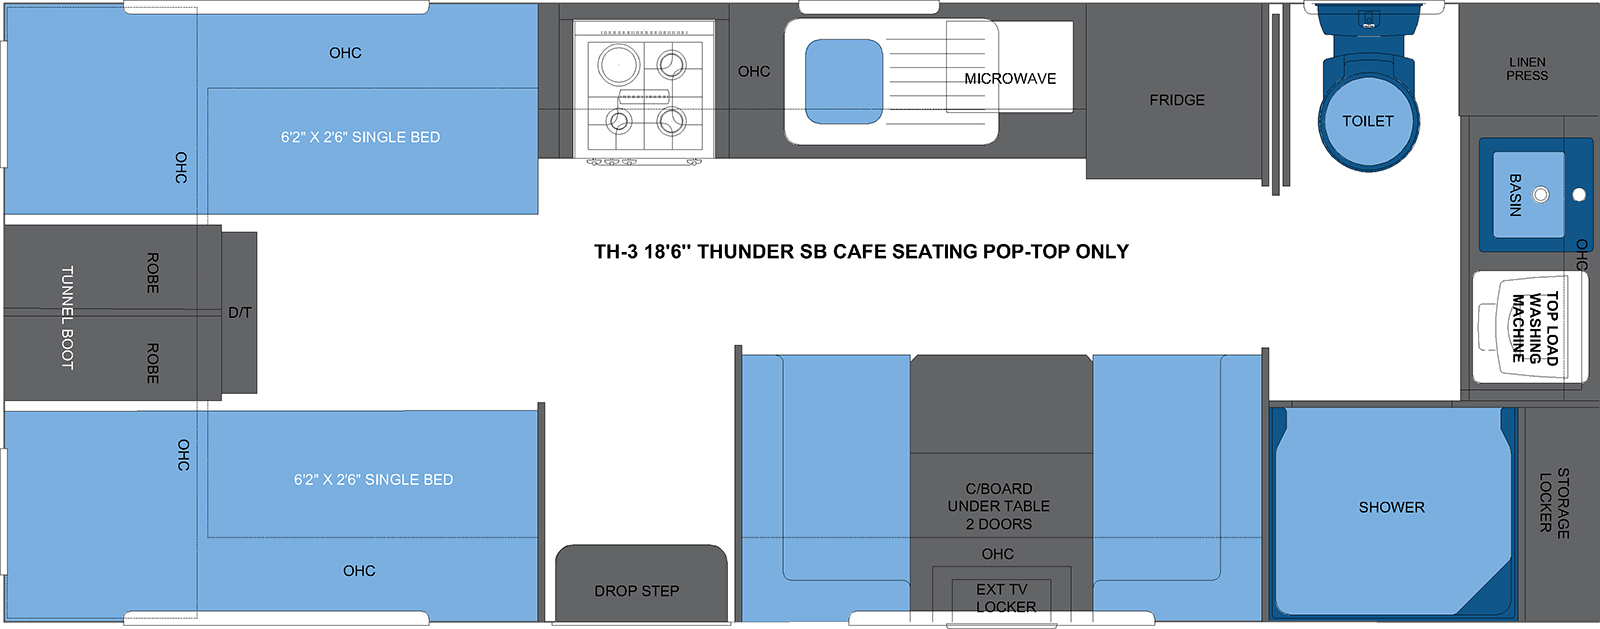 TH-3 18'6 THUNDER SB CAFE SEATING POP-TOP